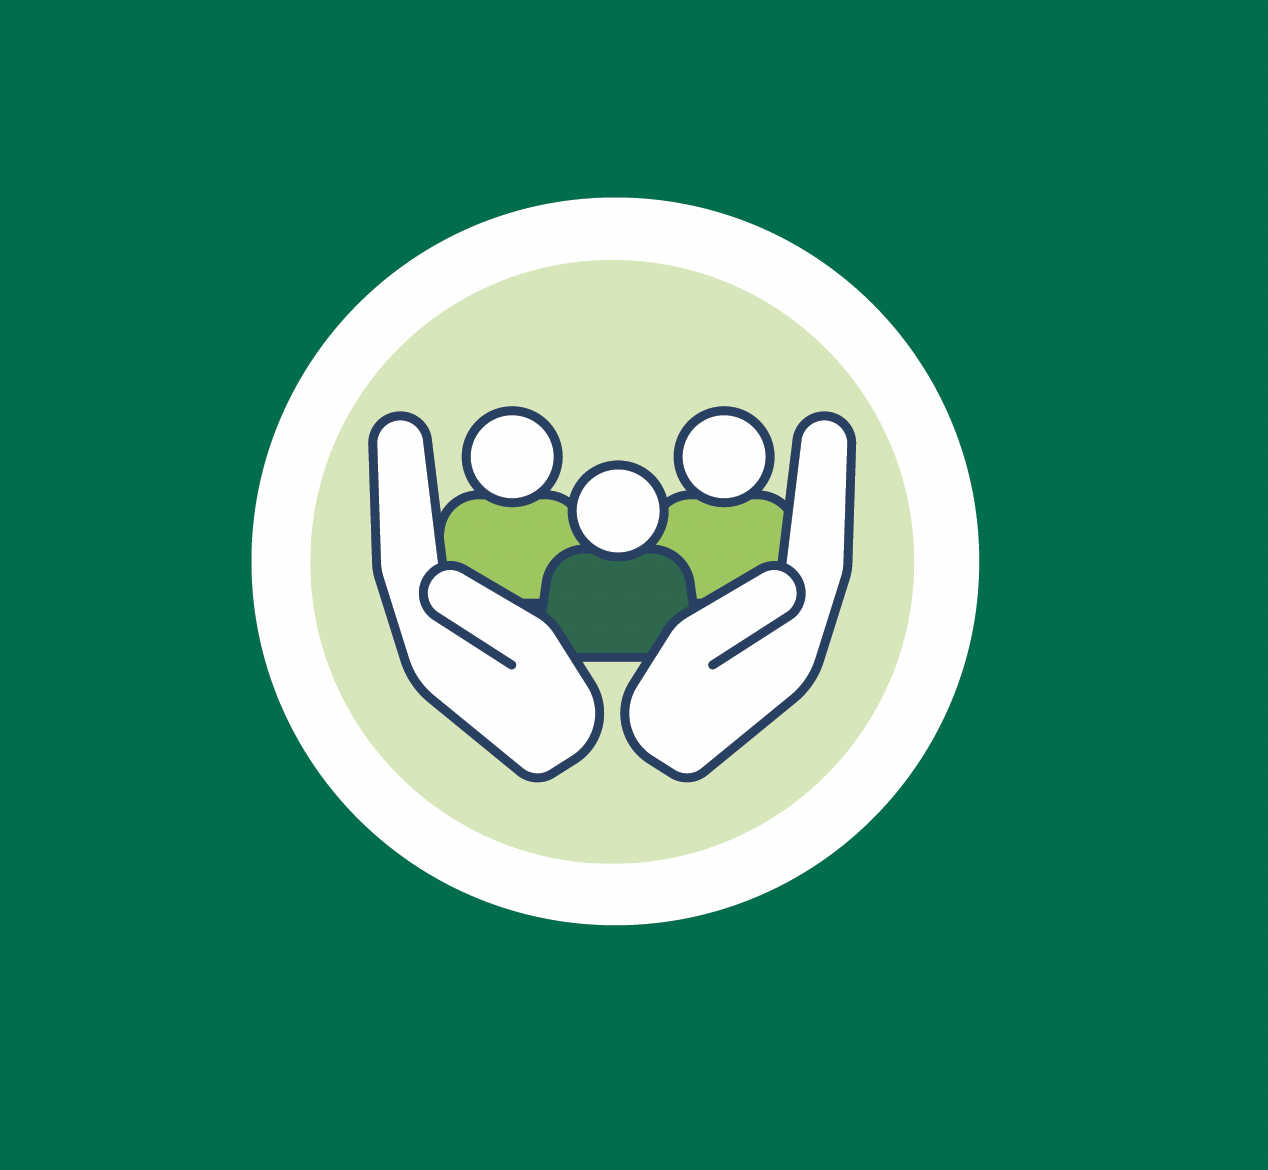 Animated graphic of hands holding people wearing green shirts